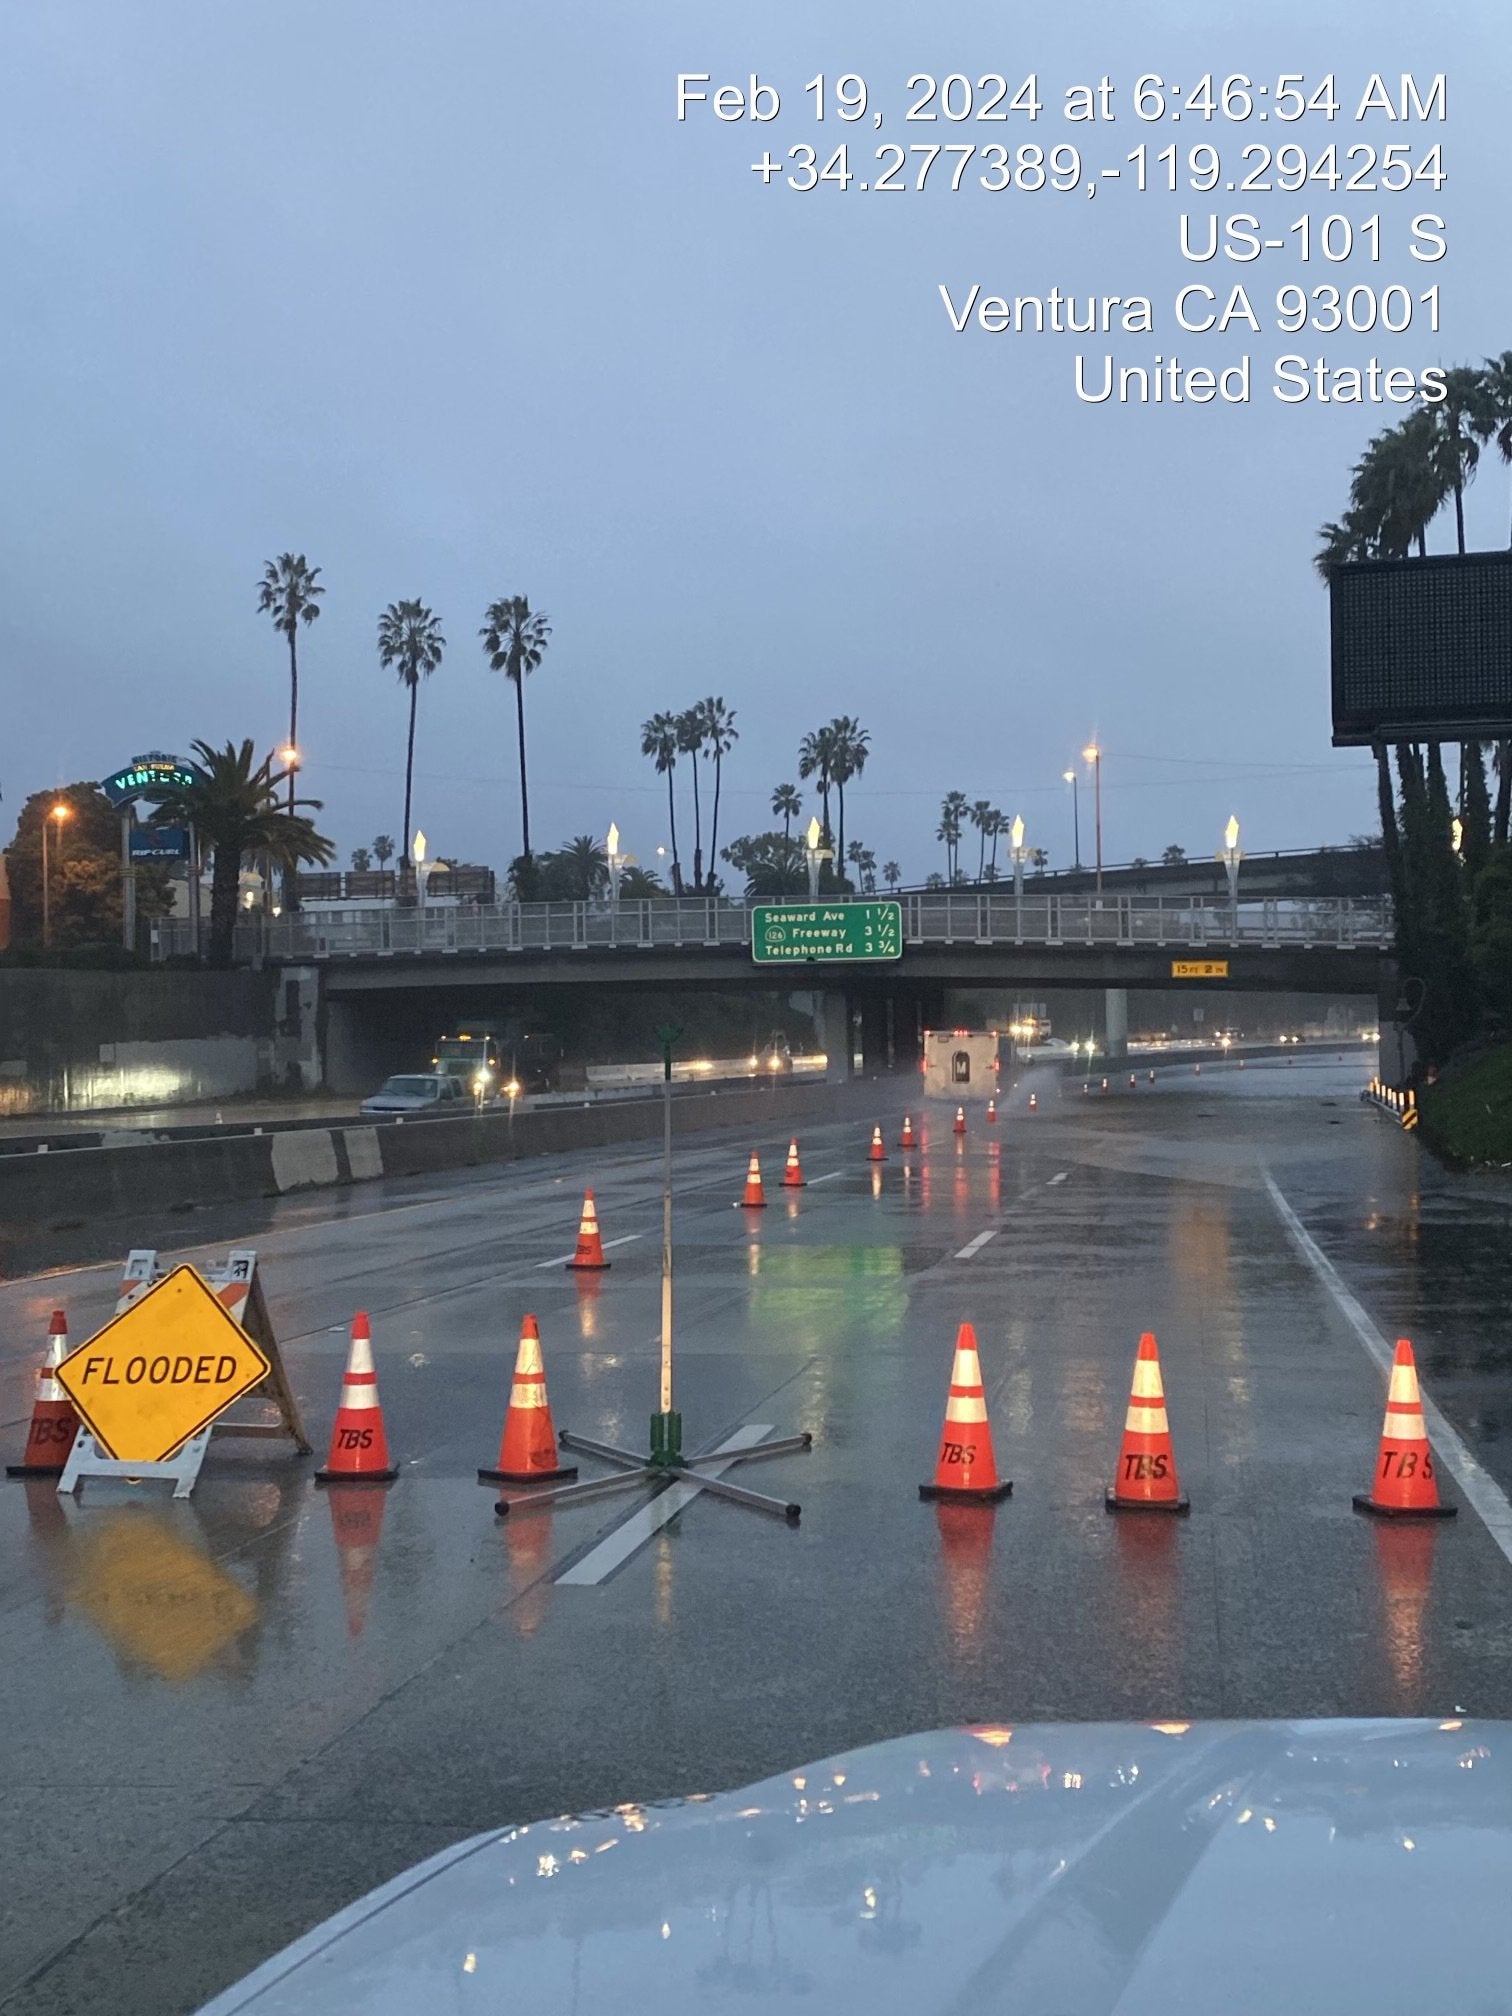 Cones and signs block off a portion os US-101 in Ventura, California as heavy rain pours down